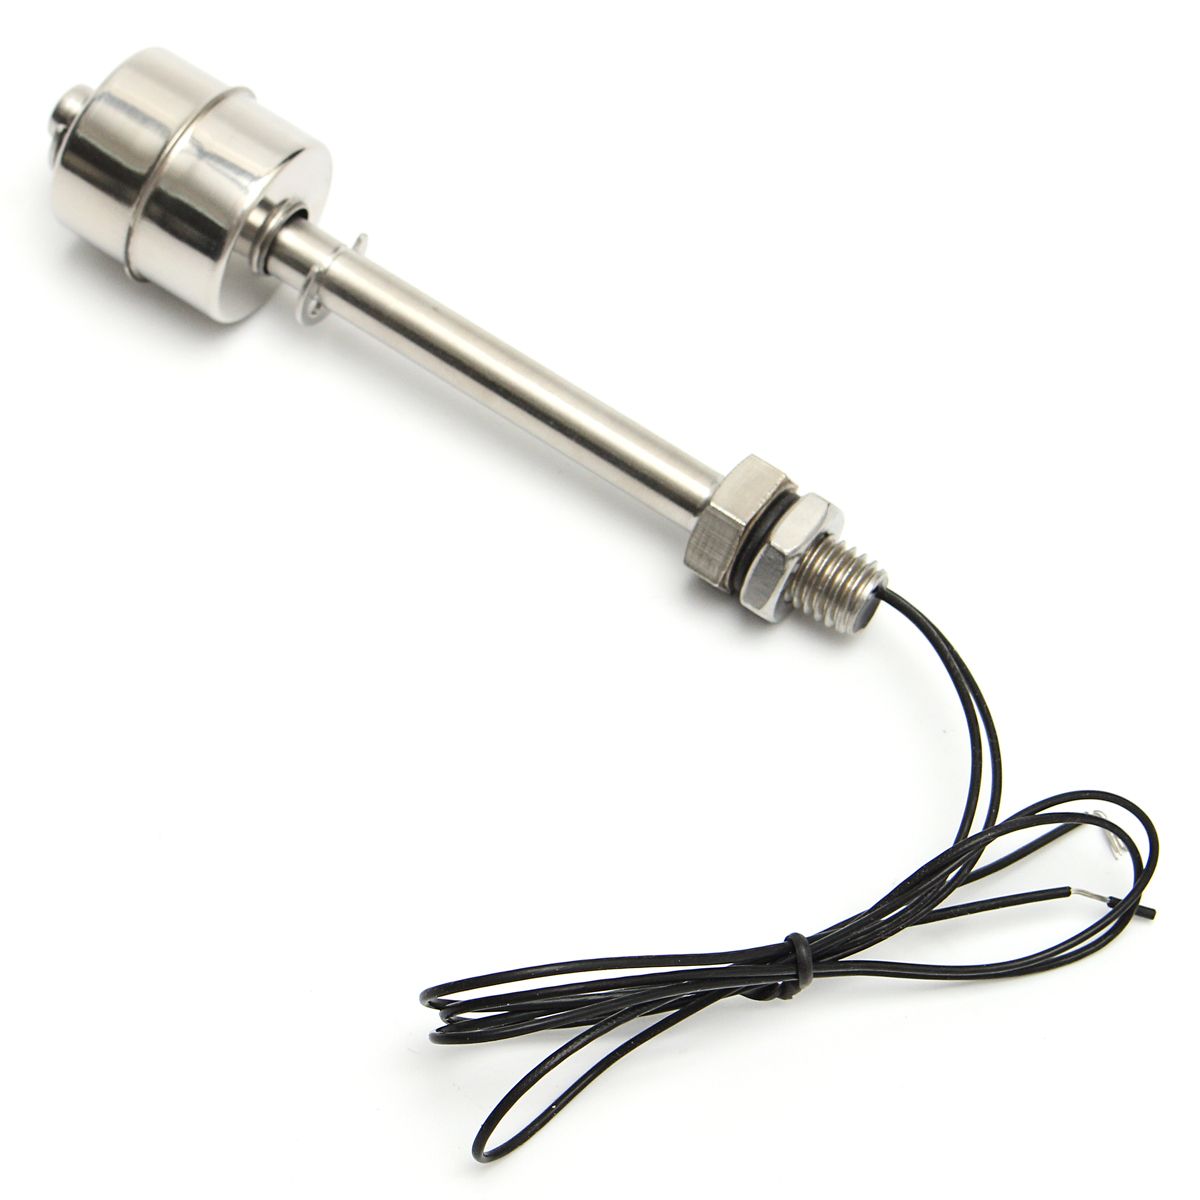 109mm-Stainless-Steel-Water-Level-Sensor-Liquid-Vertical-Float-Switch-for-Hydroponics-Gardening-1171139